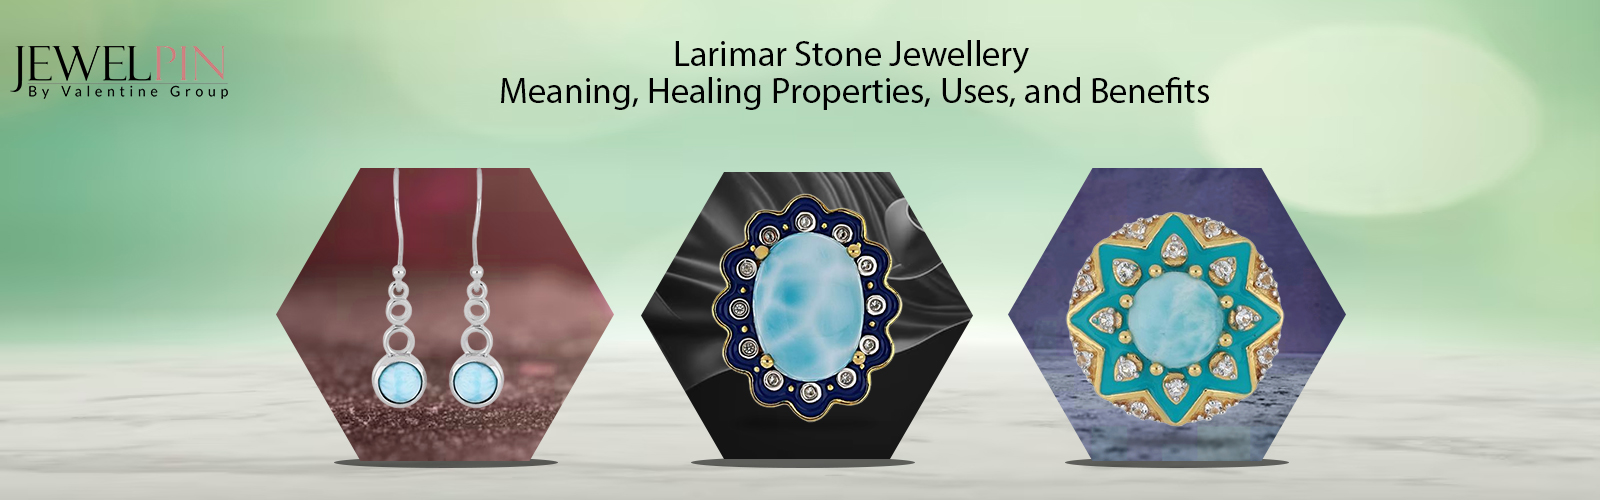 blue larimar stone jewellery meaning healing properties uses and benefits